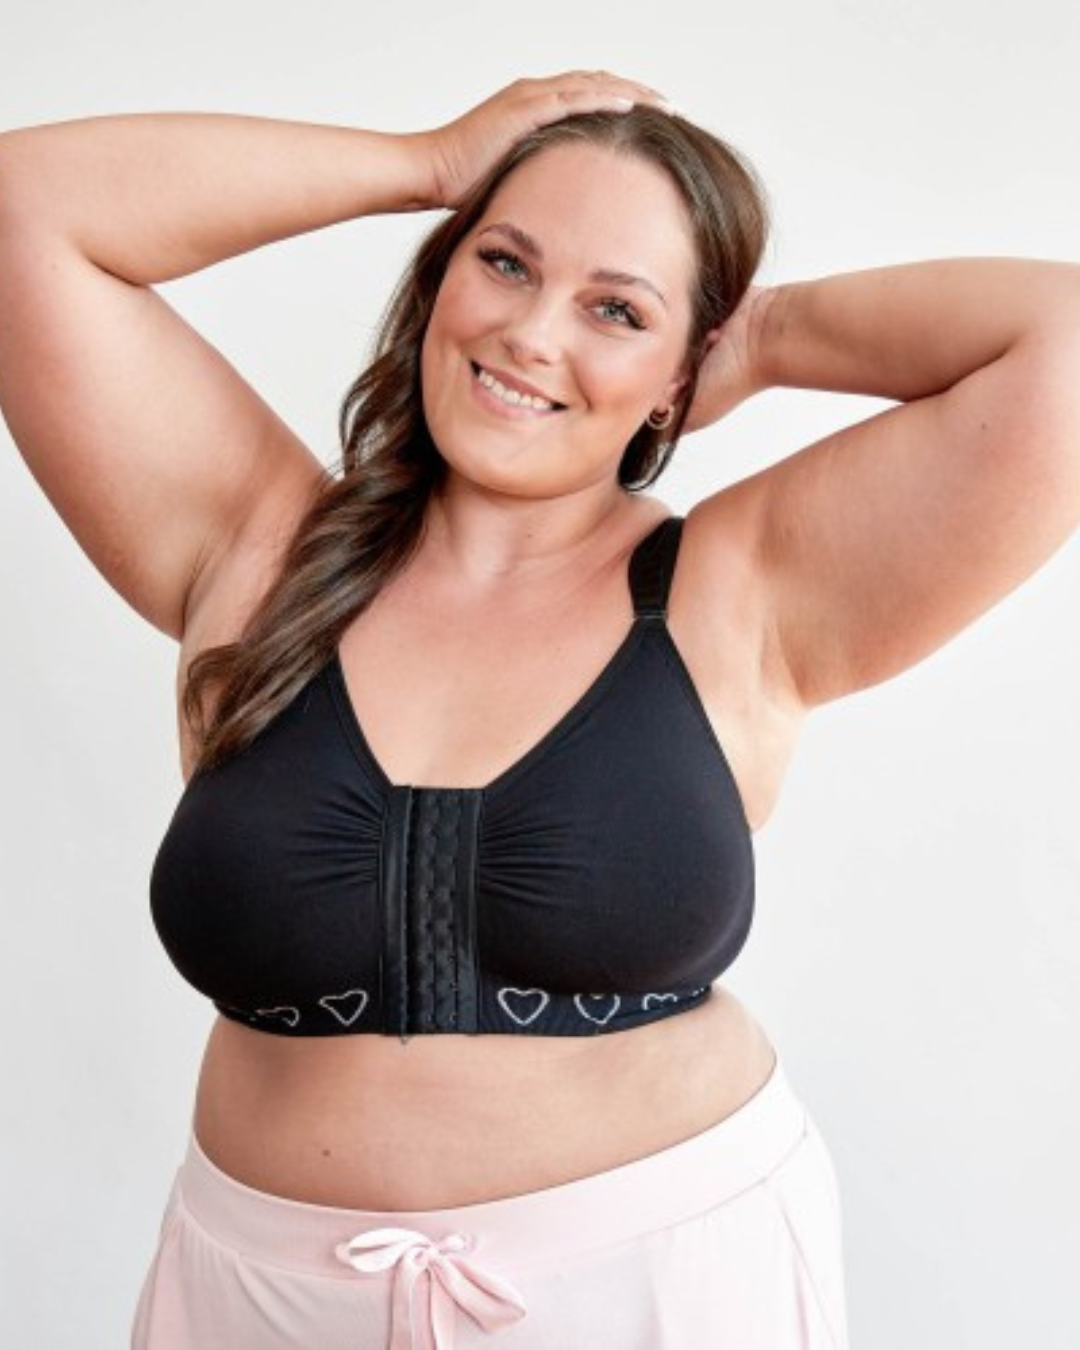 Cancer Research UK Post-Surgery Comfort Bra - Soft bamboo fabric bra designed for breast cancer patients. Offers comfort and support after mastectomy or breast cancer surgery. Available in white, black, and blush. Sizes range from Small to XXL. 100% net profits fund breast cancer research.